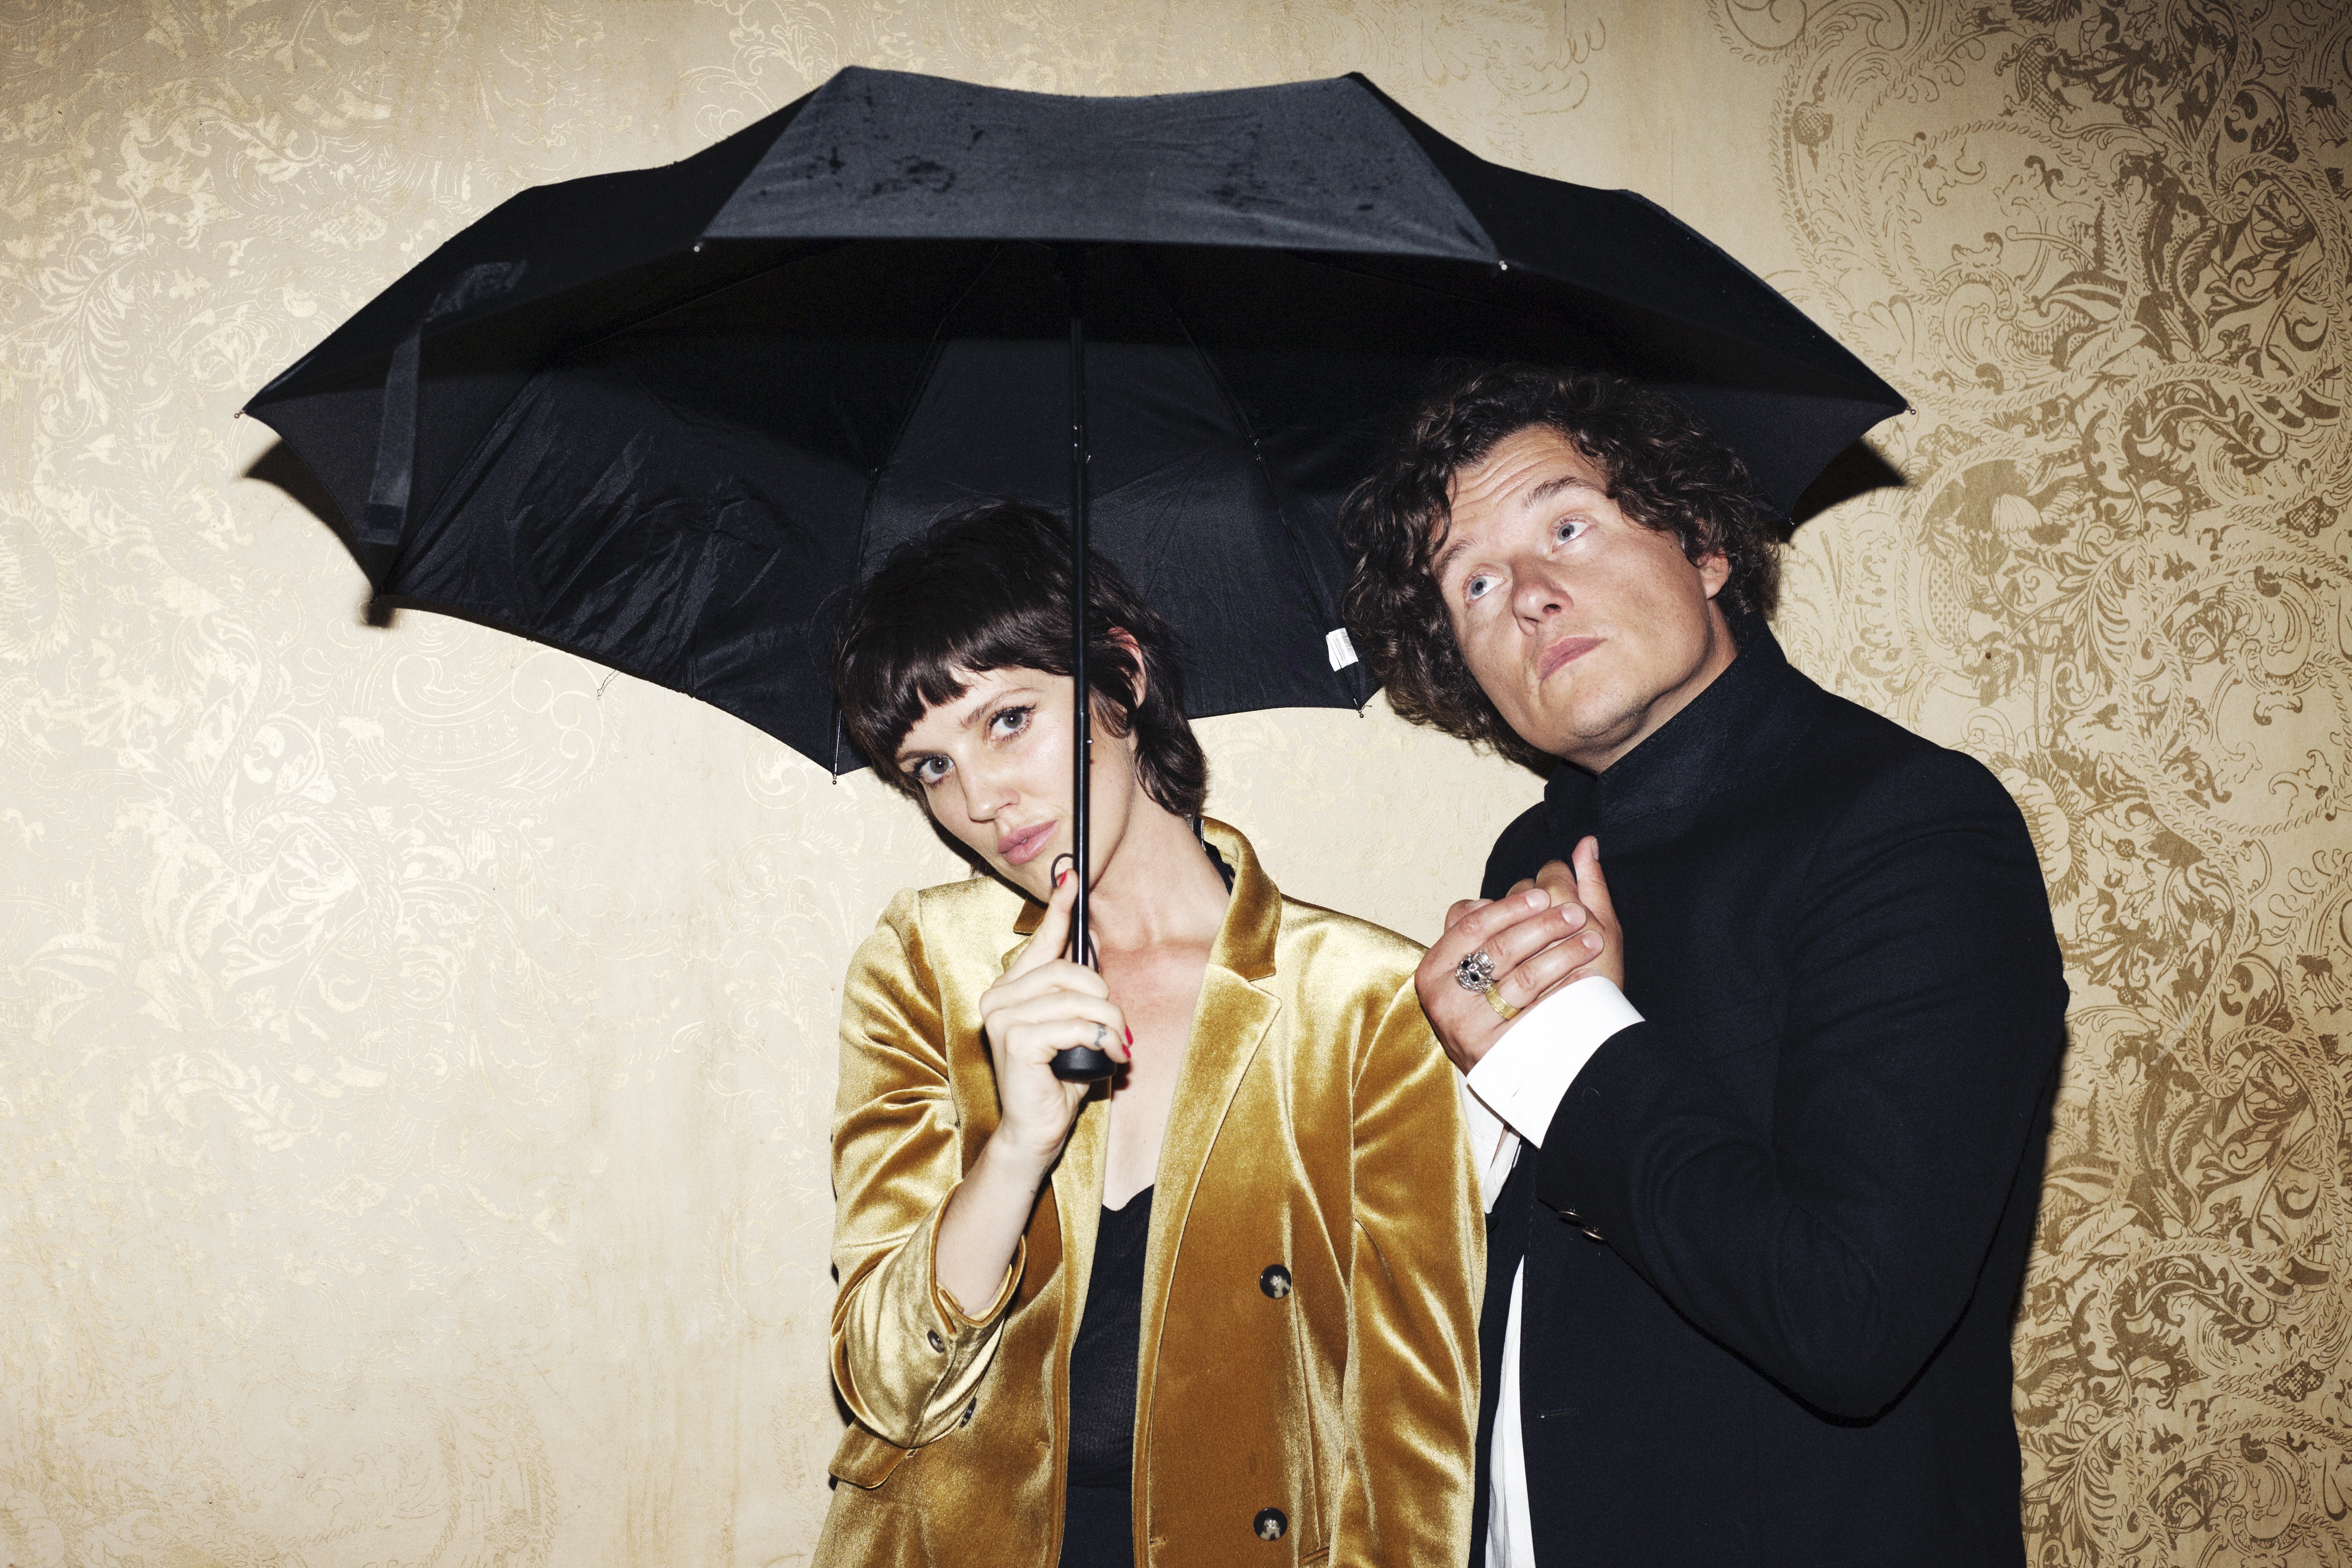 The music duo Rhonda Star consists of Ronja Violett and her boyfriend Alex Voigt. Together they stand under an umbrella, which looks funny because there is wallpaper in the background. Ronja holds the umbrella and looks into the camera with her head tilted. Alex has turned his gaze towards the sky.